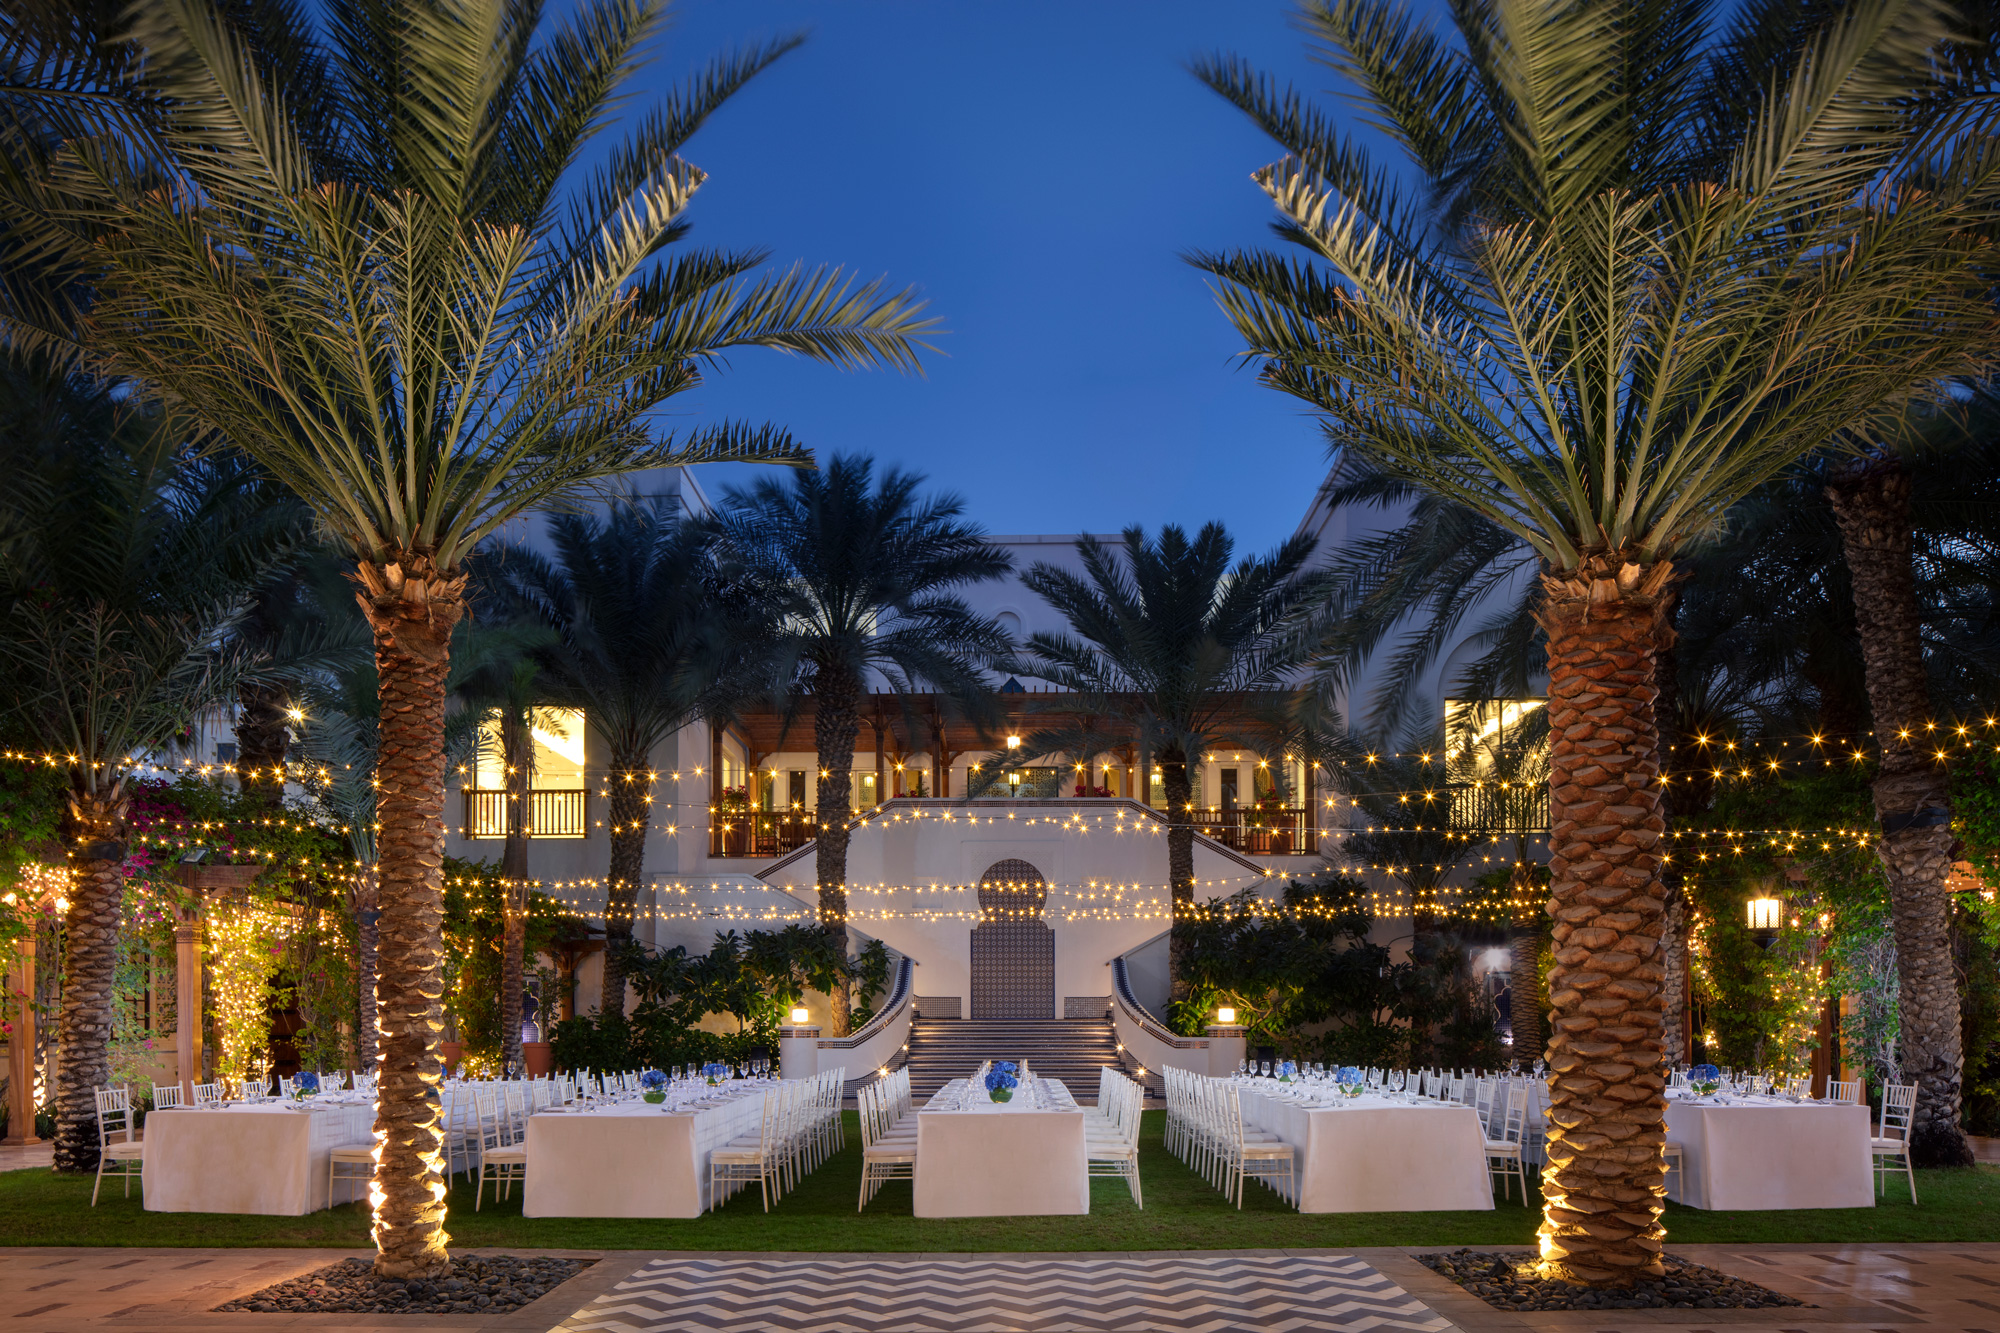  Experience Ramadan with an Unforgettable Iftar at Palm Garden